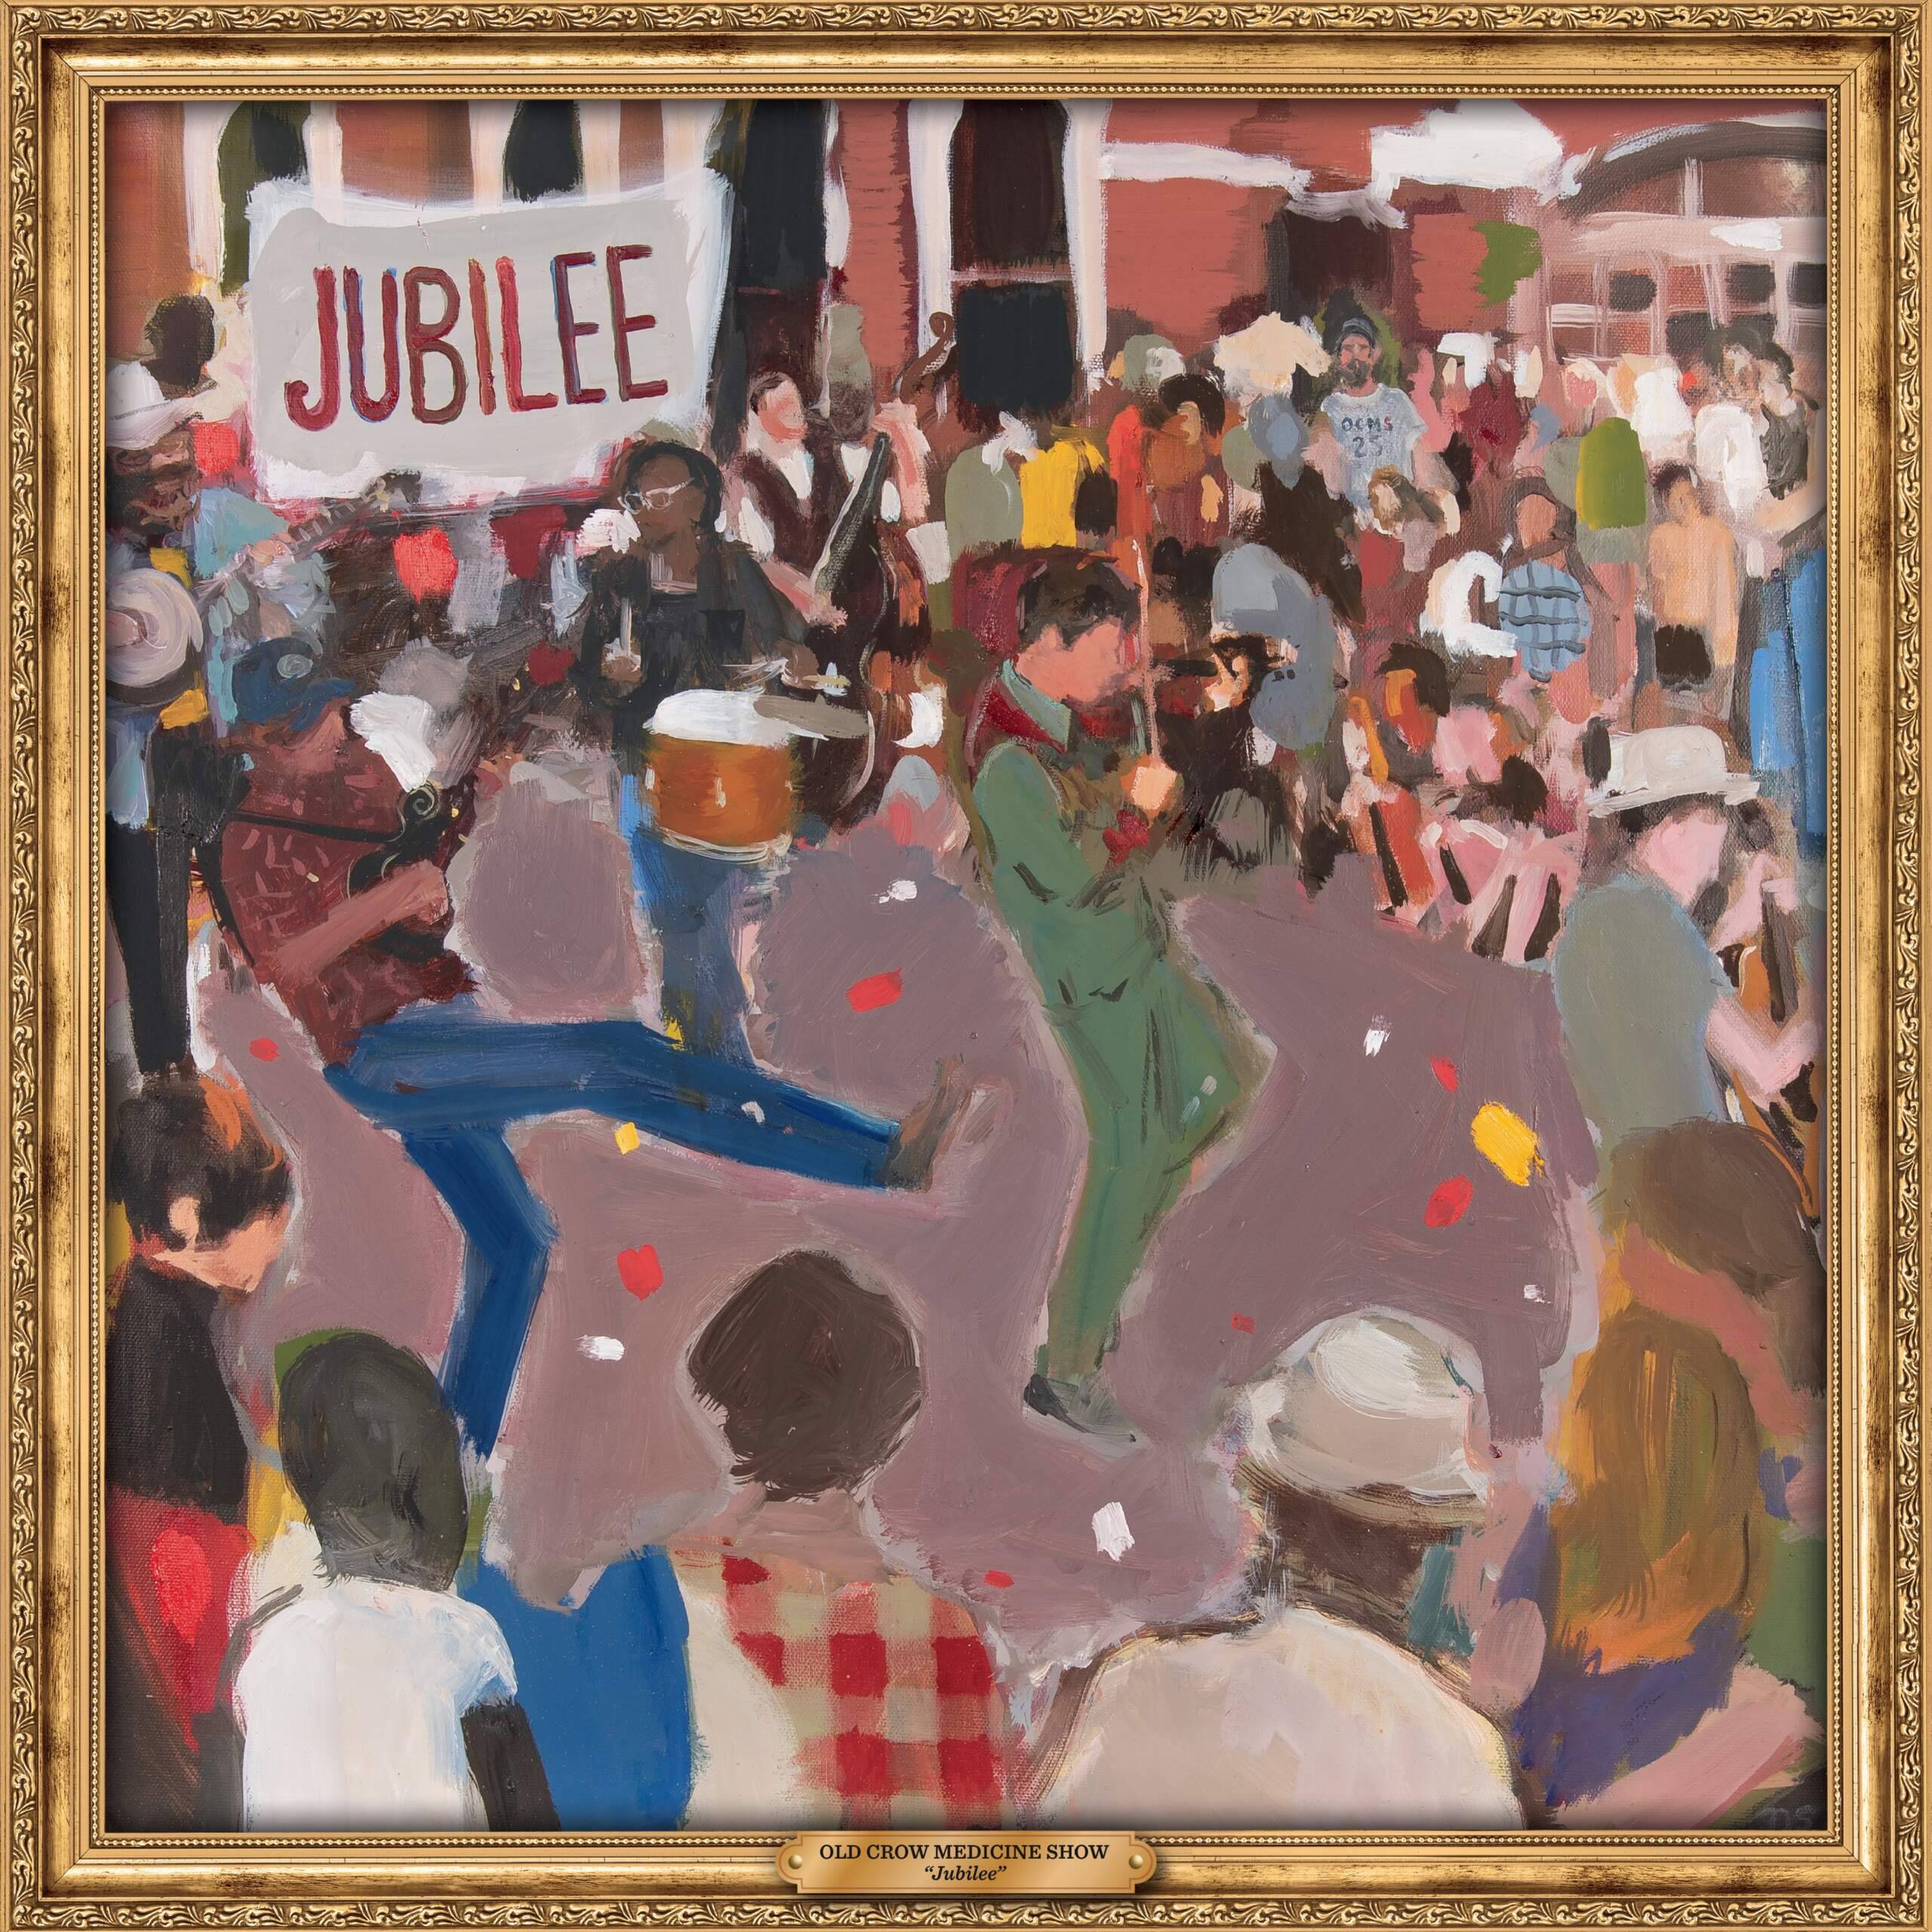 The cover of &quot;Jubilee&quot; by Old Crow Medicine Show. (Courtesy of Missing Piece Group)